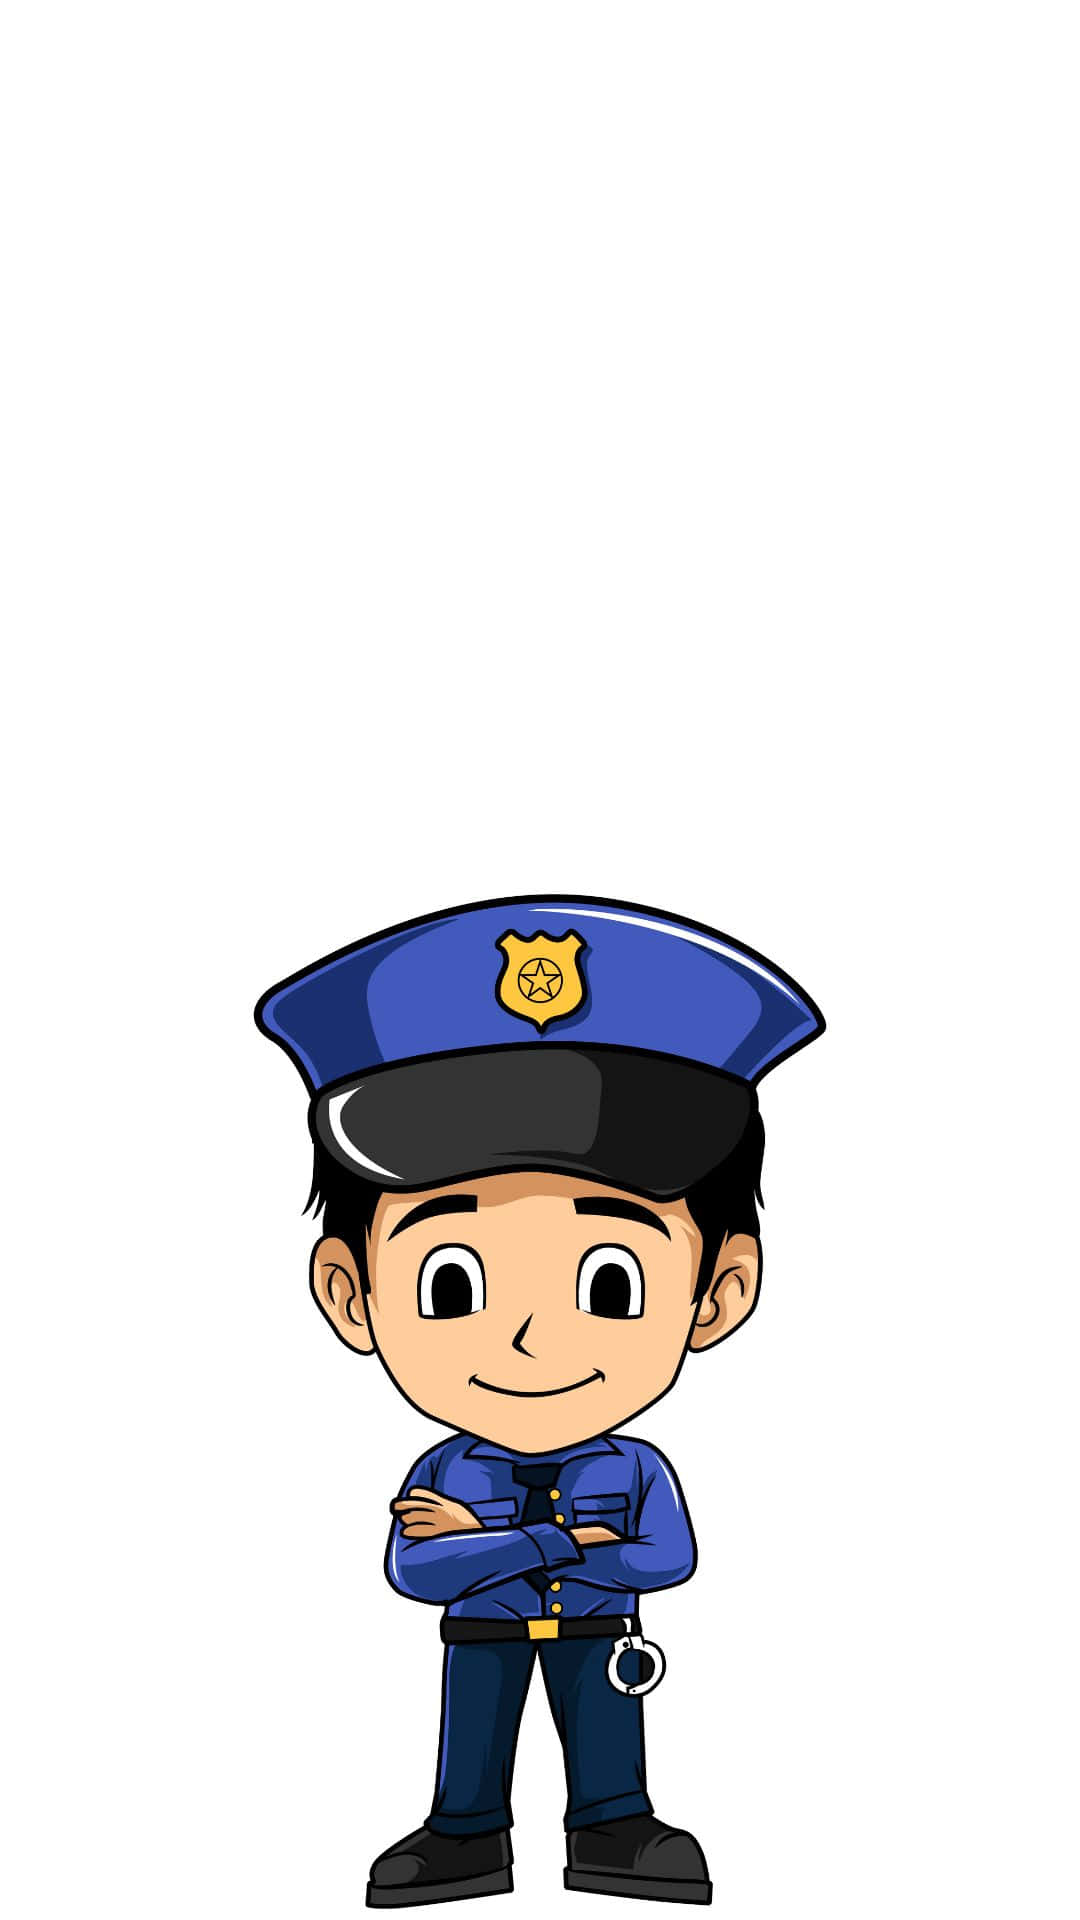 Cute Cop In Uniform With Arms Crossed Background